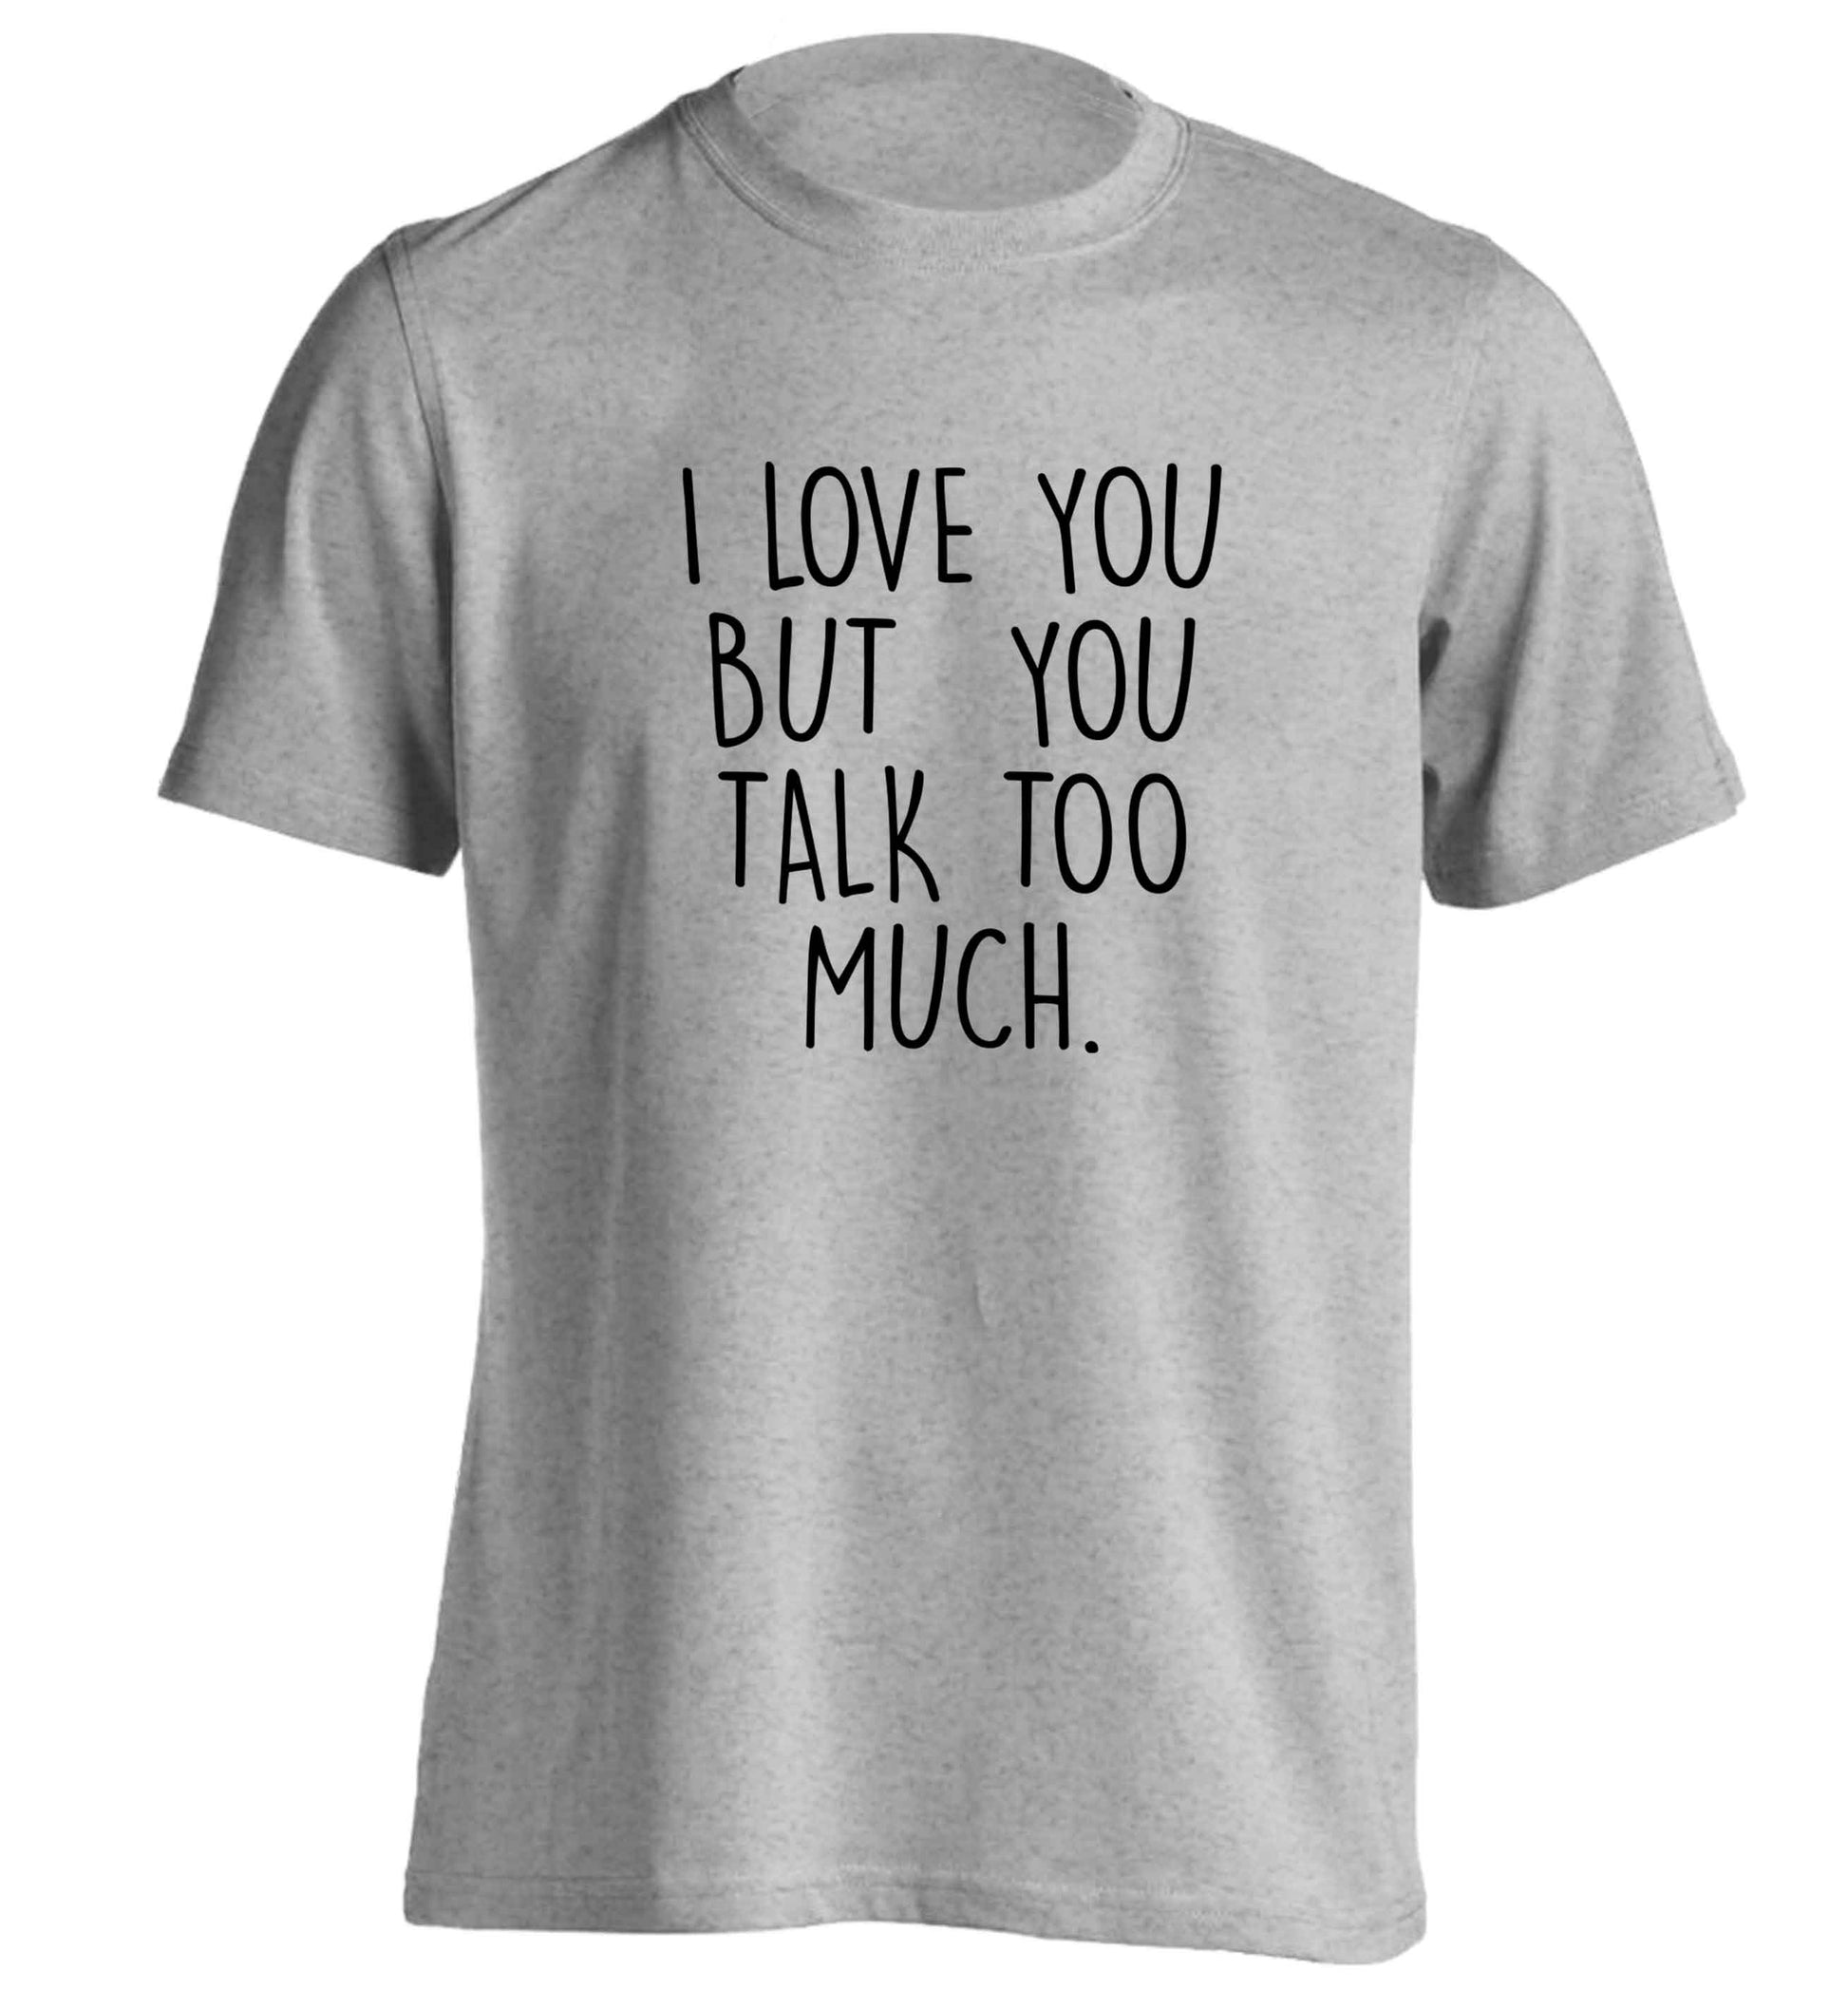 I love you but you talk too much adults unisex grey Tshirt 2XL